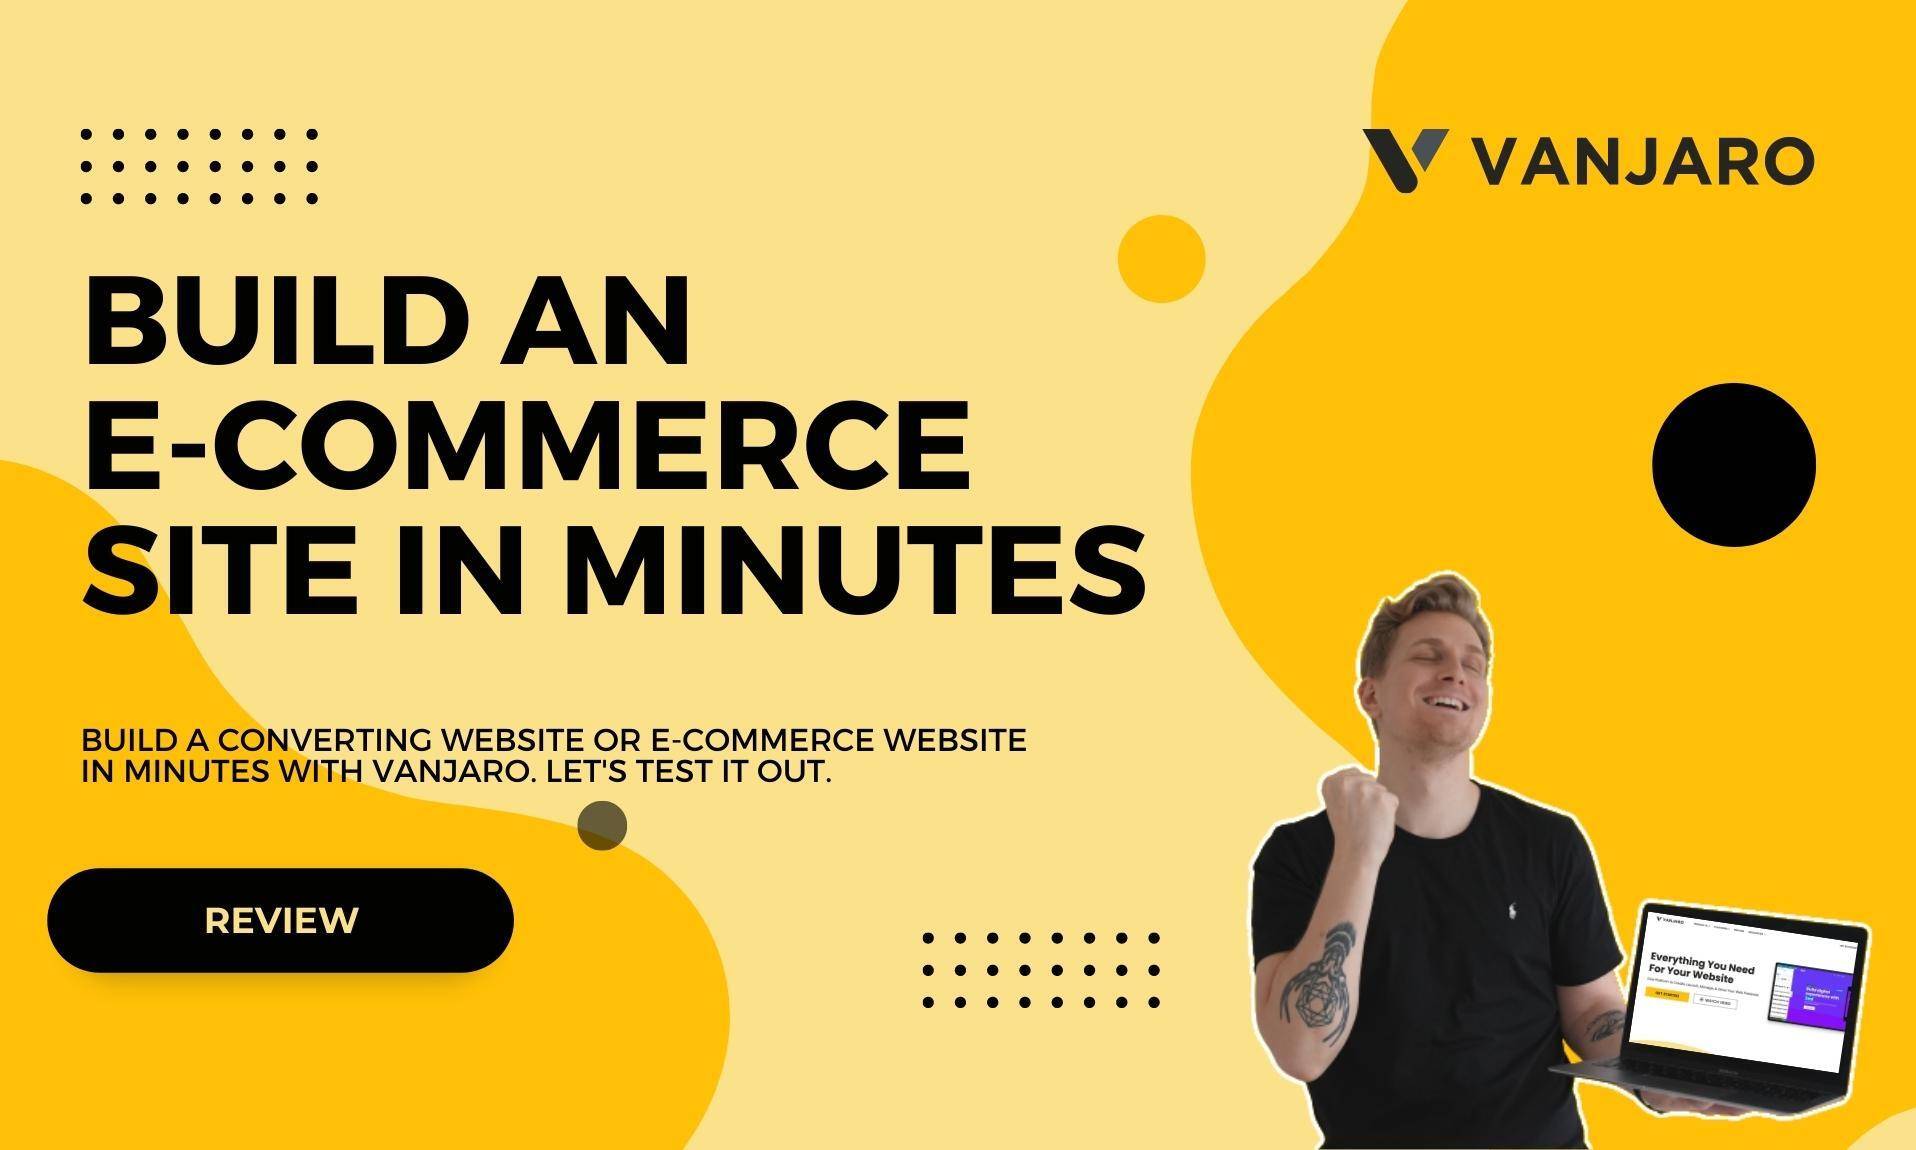 Vanjaro review - Build an e-commerce site in minutes